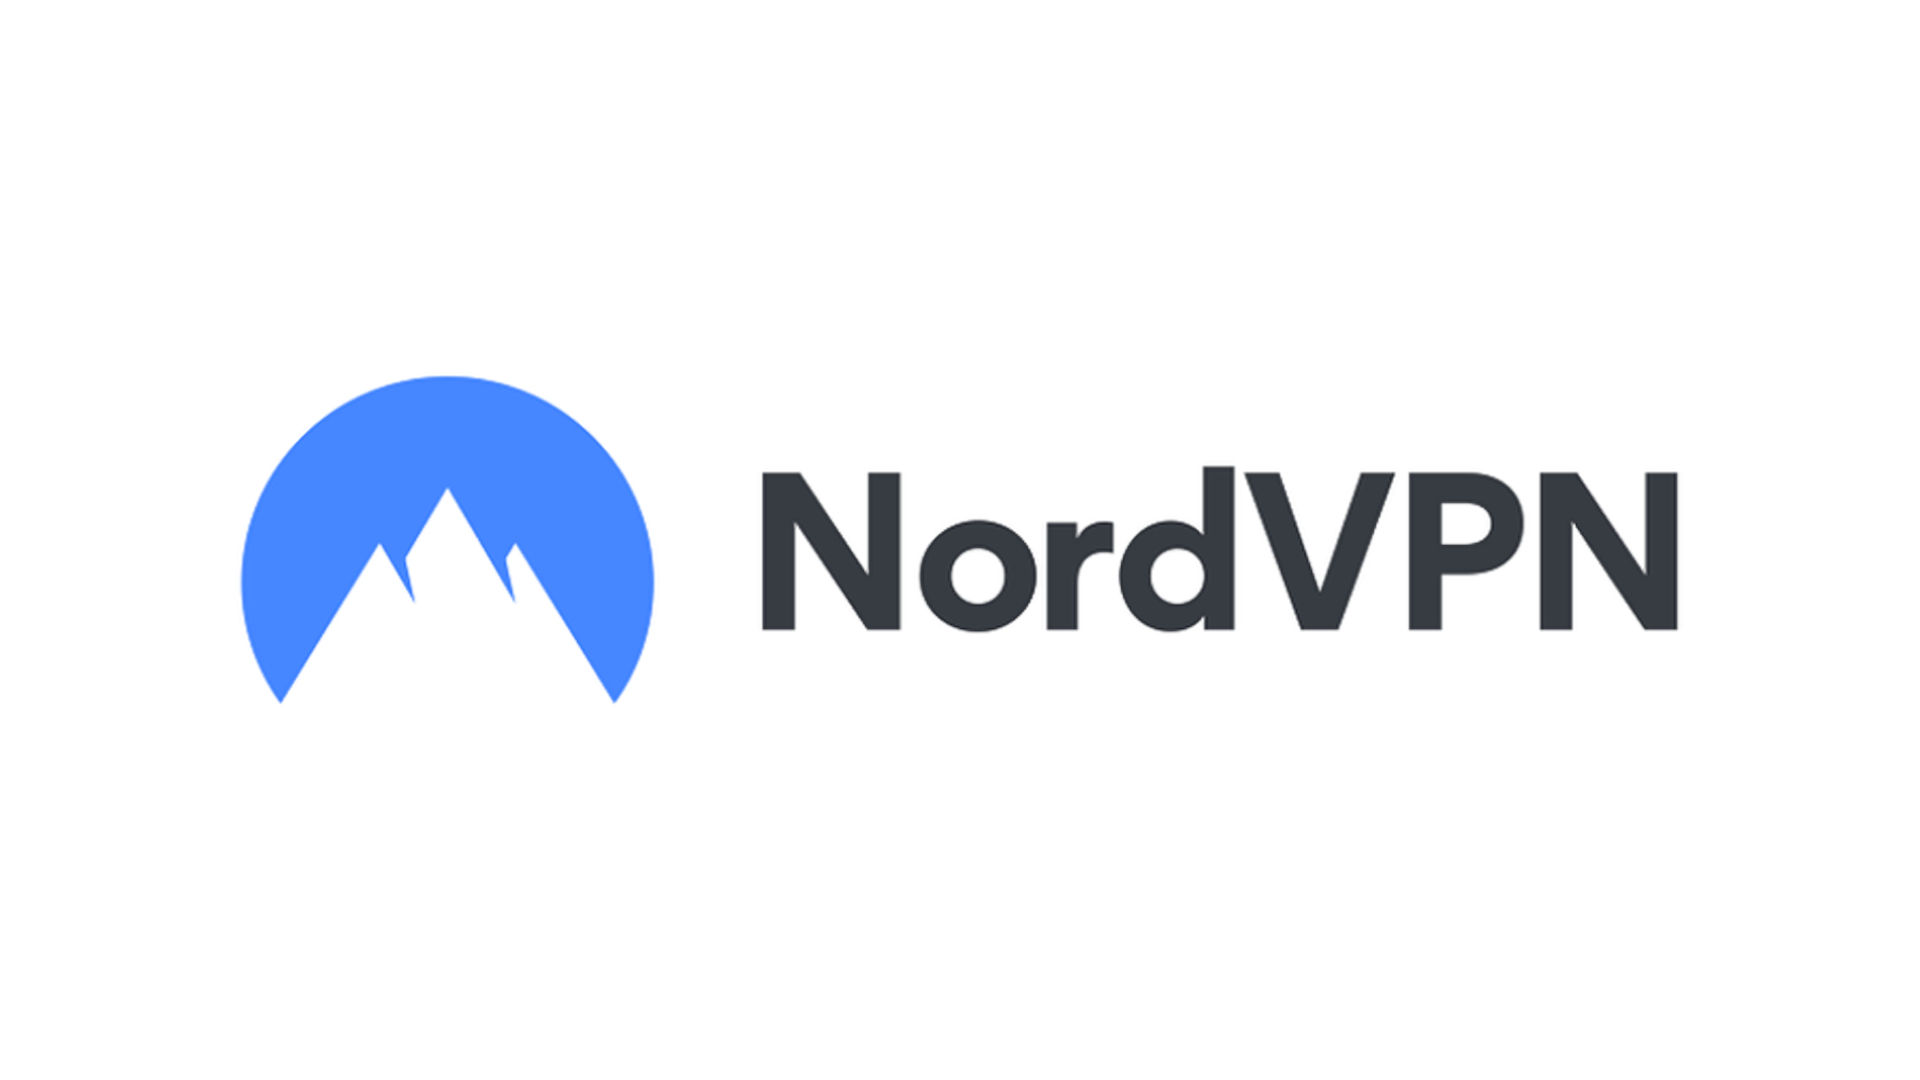 Best VPN for iPad - NordVPN. Image shows the business's logo.